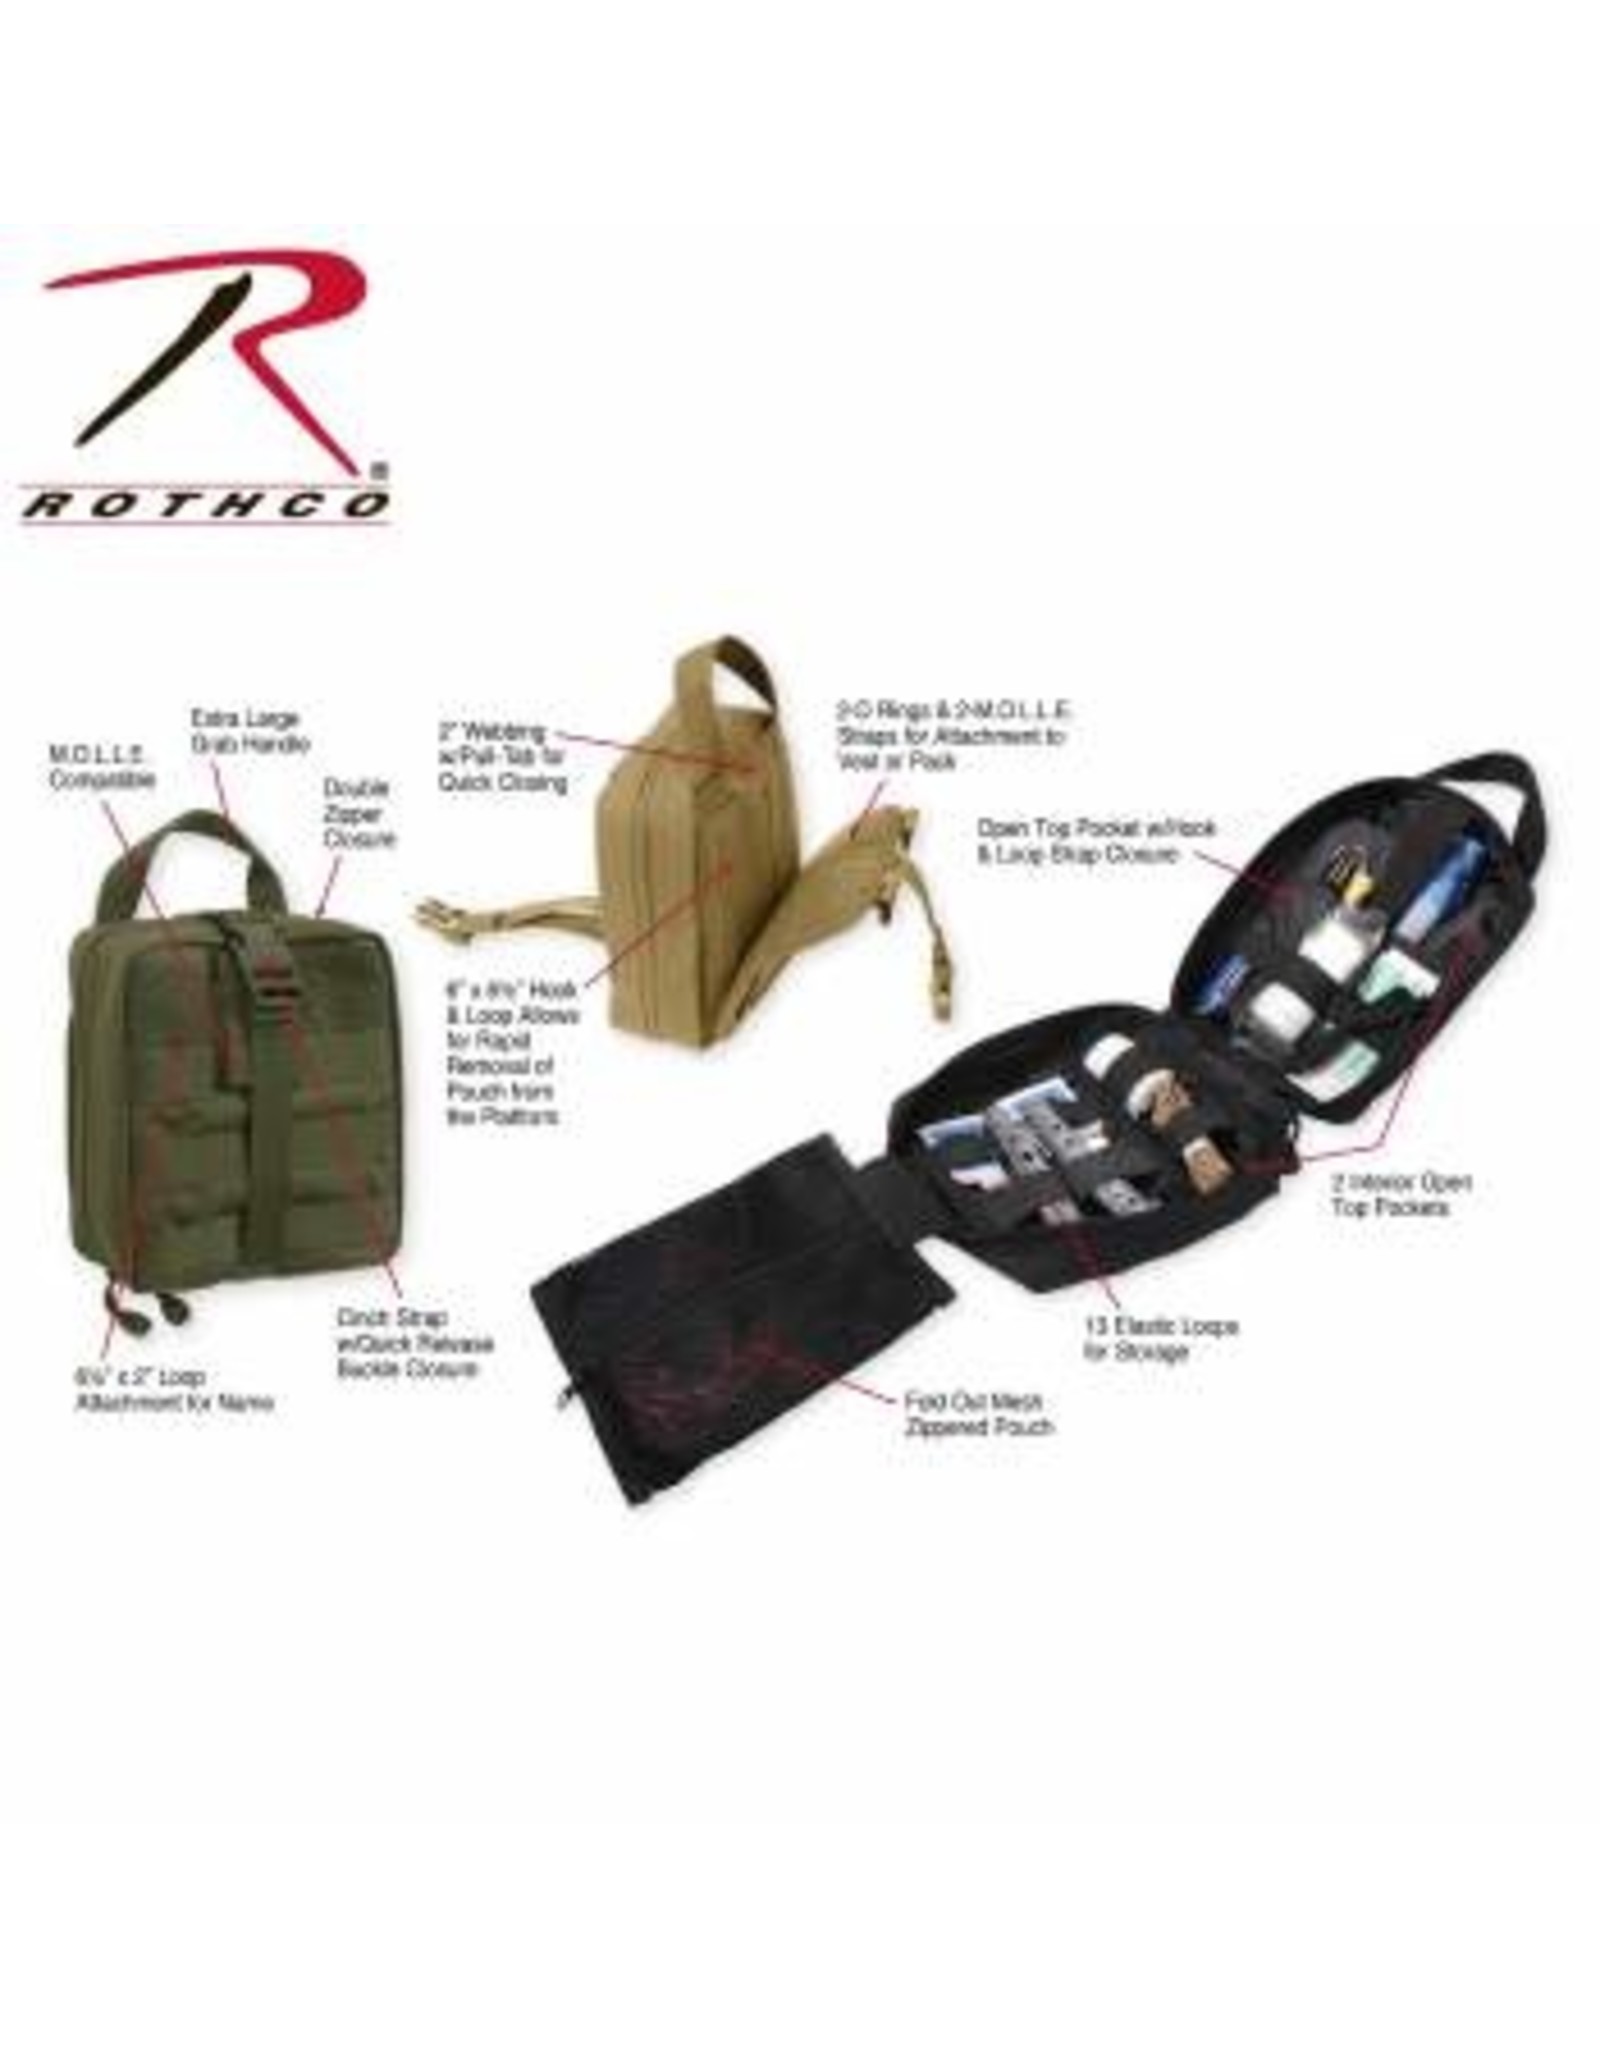 ROTHCO Rothco Tactical Breakaway Pouch